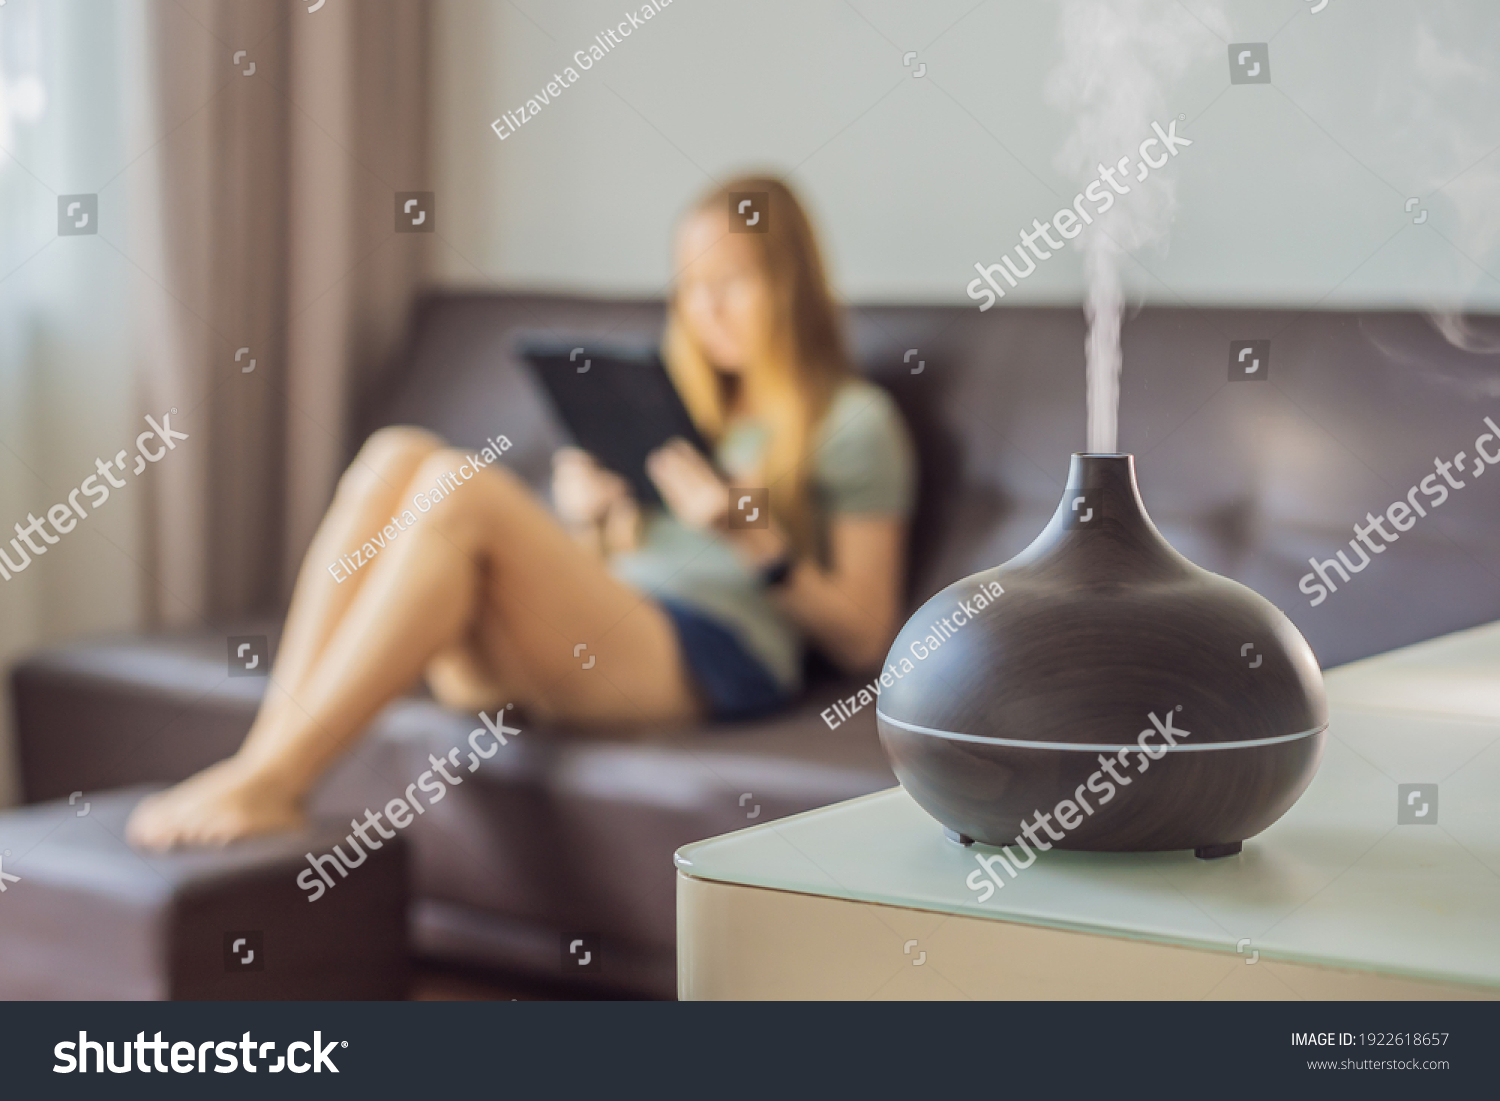 Aromatherapy Concept. Wooden Electric Ultrasonic Essential Oil Aroma Diffuser and Humidifier. Ultrasonic aroma diffuser for home. Woman resting at home #1922618657